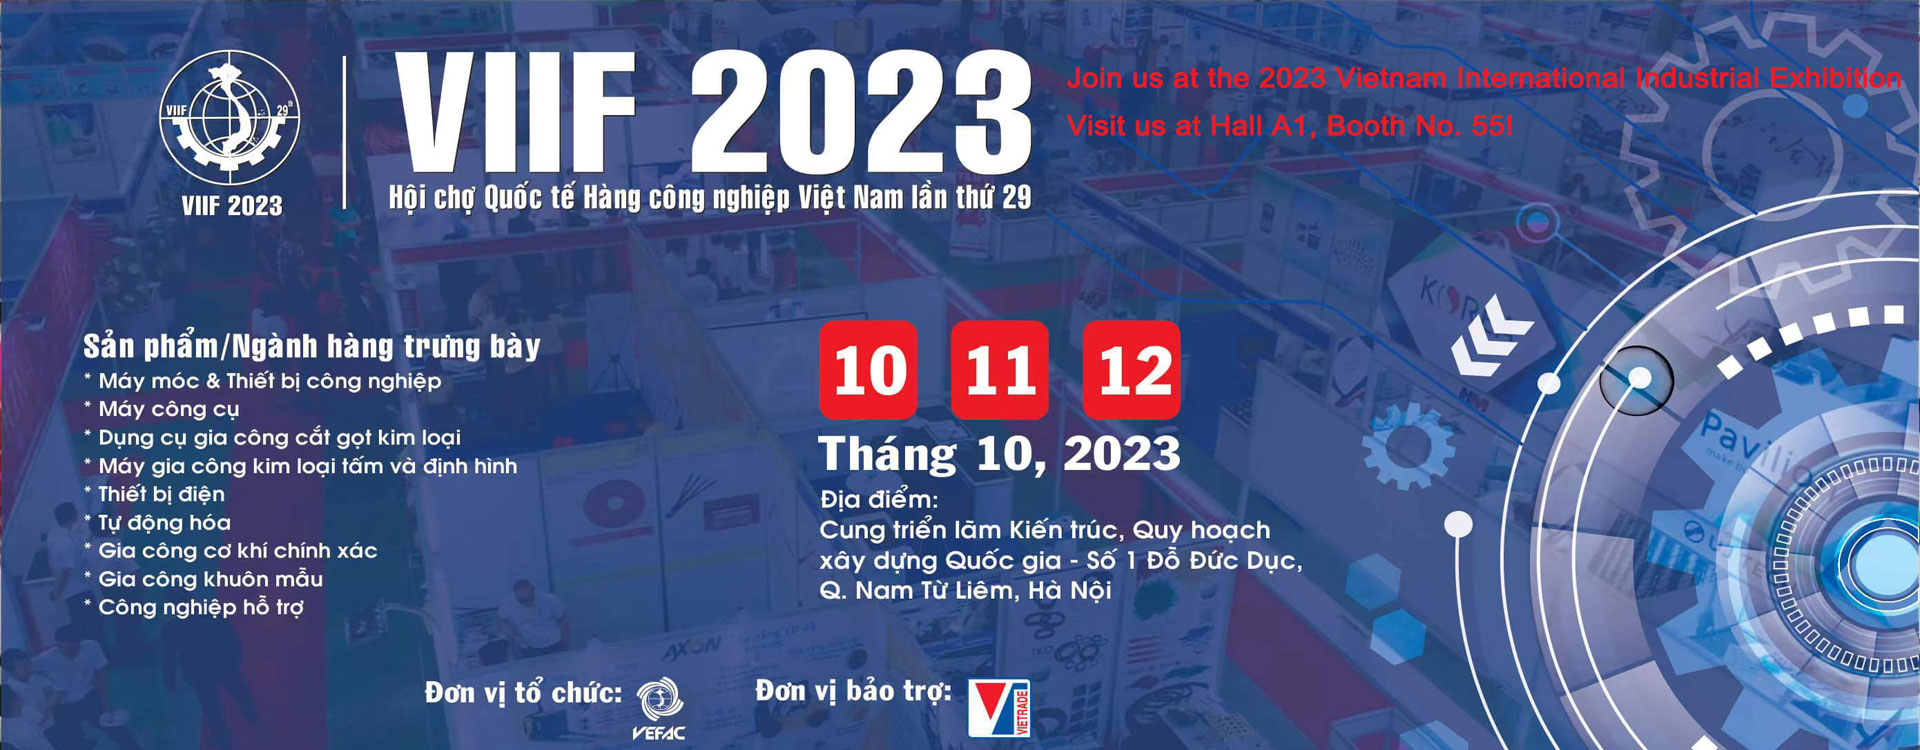 Join us at the 2023 Vietnam International Industrial Exhibition!